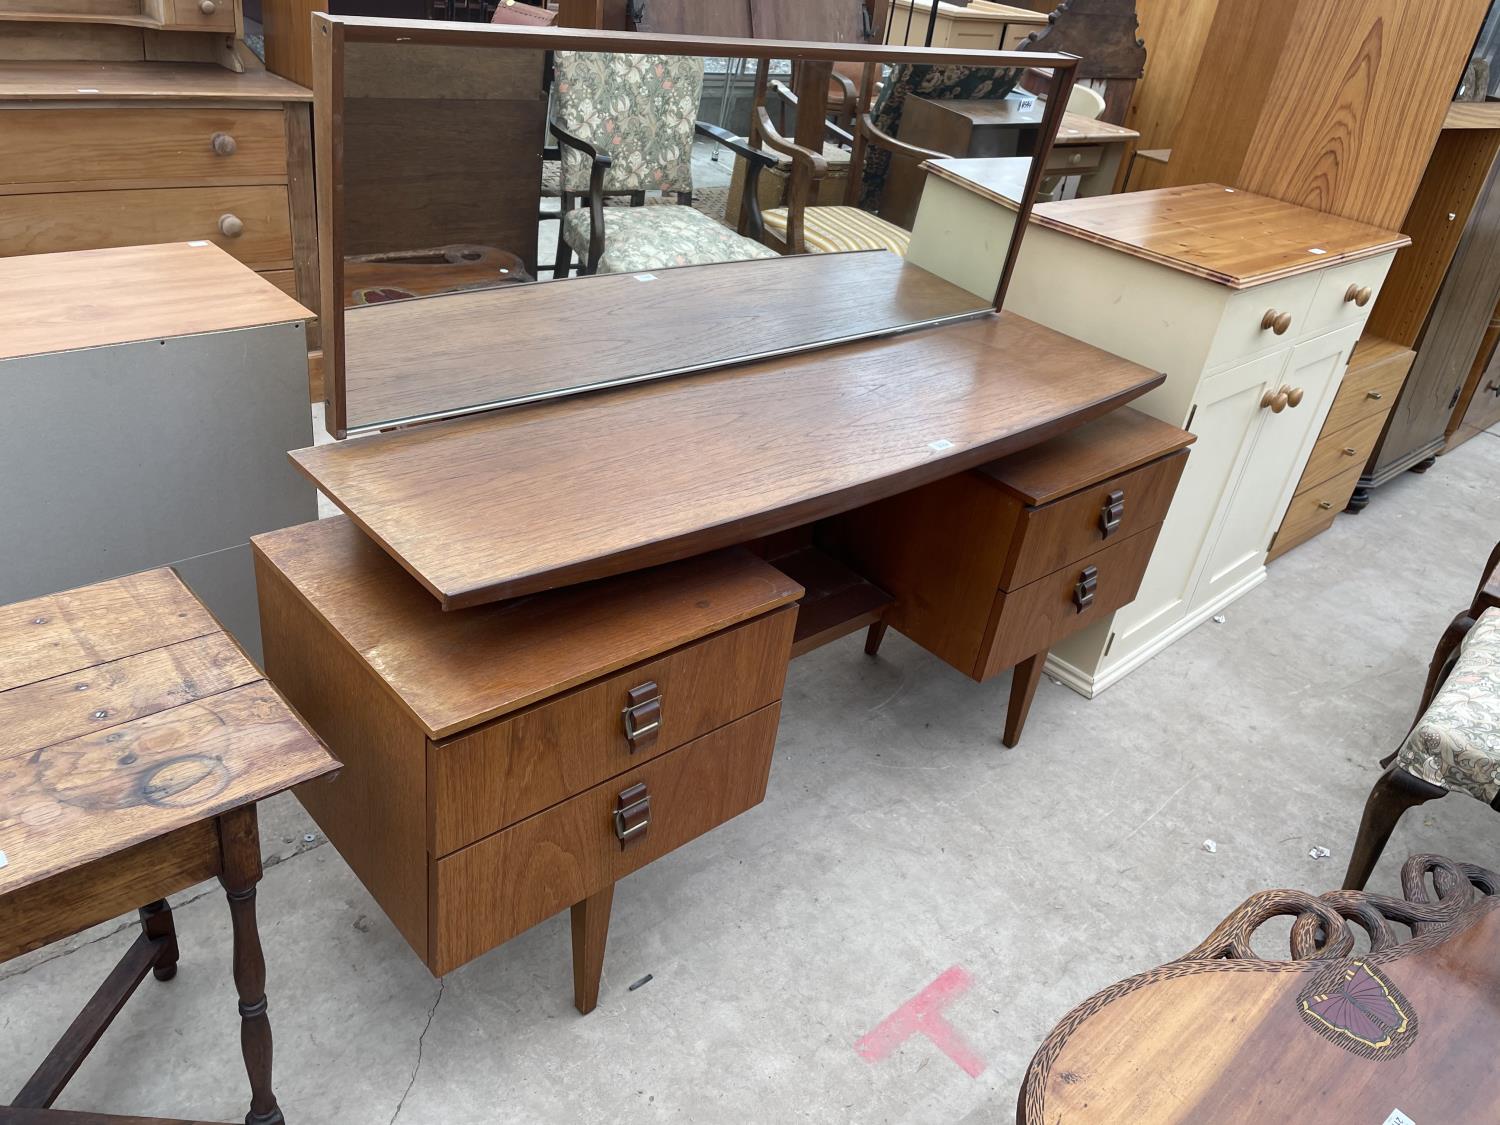 A RETRO TEAK DRESSING TABLE ENCLOSING FOUR DRAWERS WITH BELT BUCKLE STYLE HANDLES, 60" WIDE